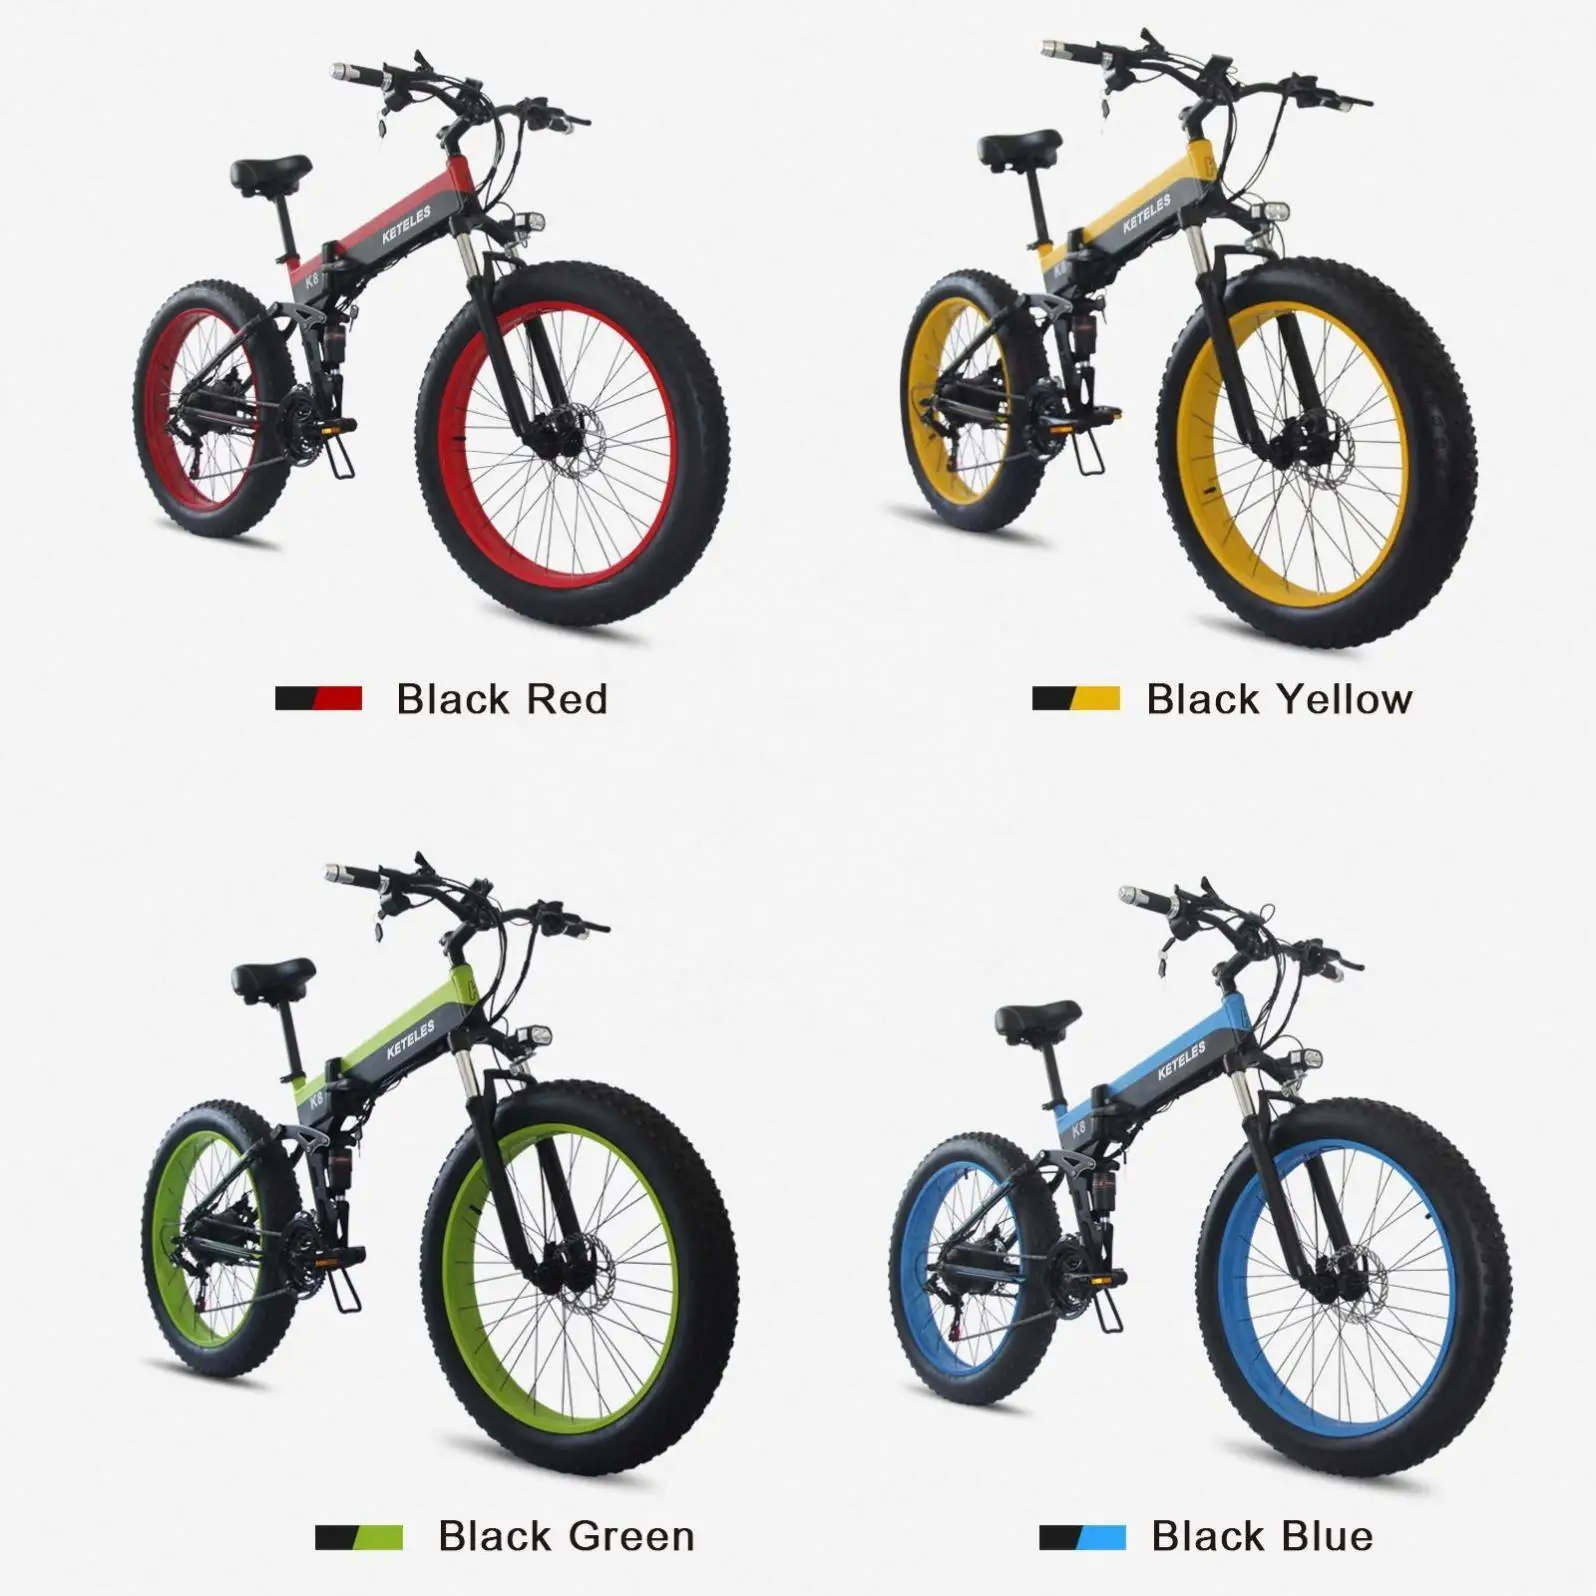 

2021 coolest 26 inch FAT Tire SNOW EBIKE 48v 1000w Mountain Electric bike with Large capacity lithium battery Powerful frame